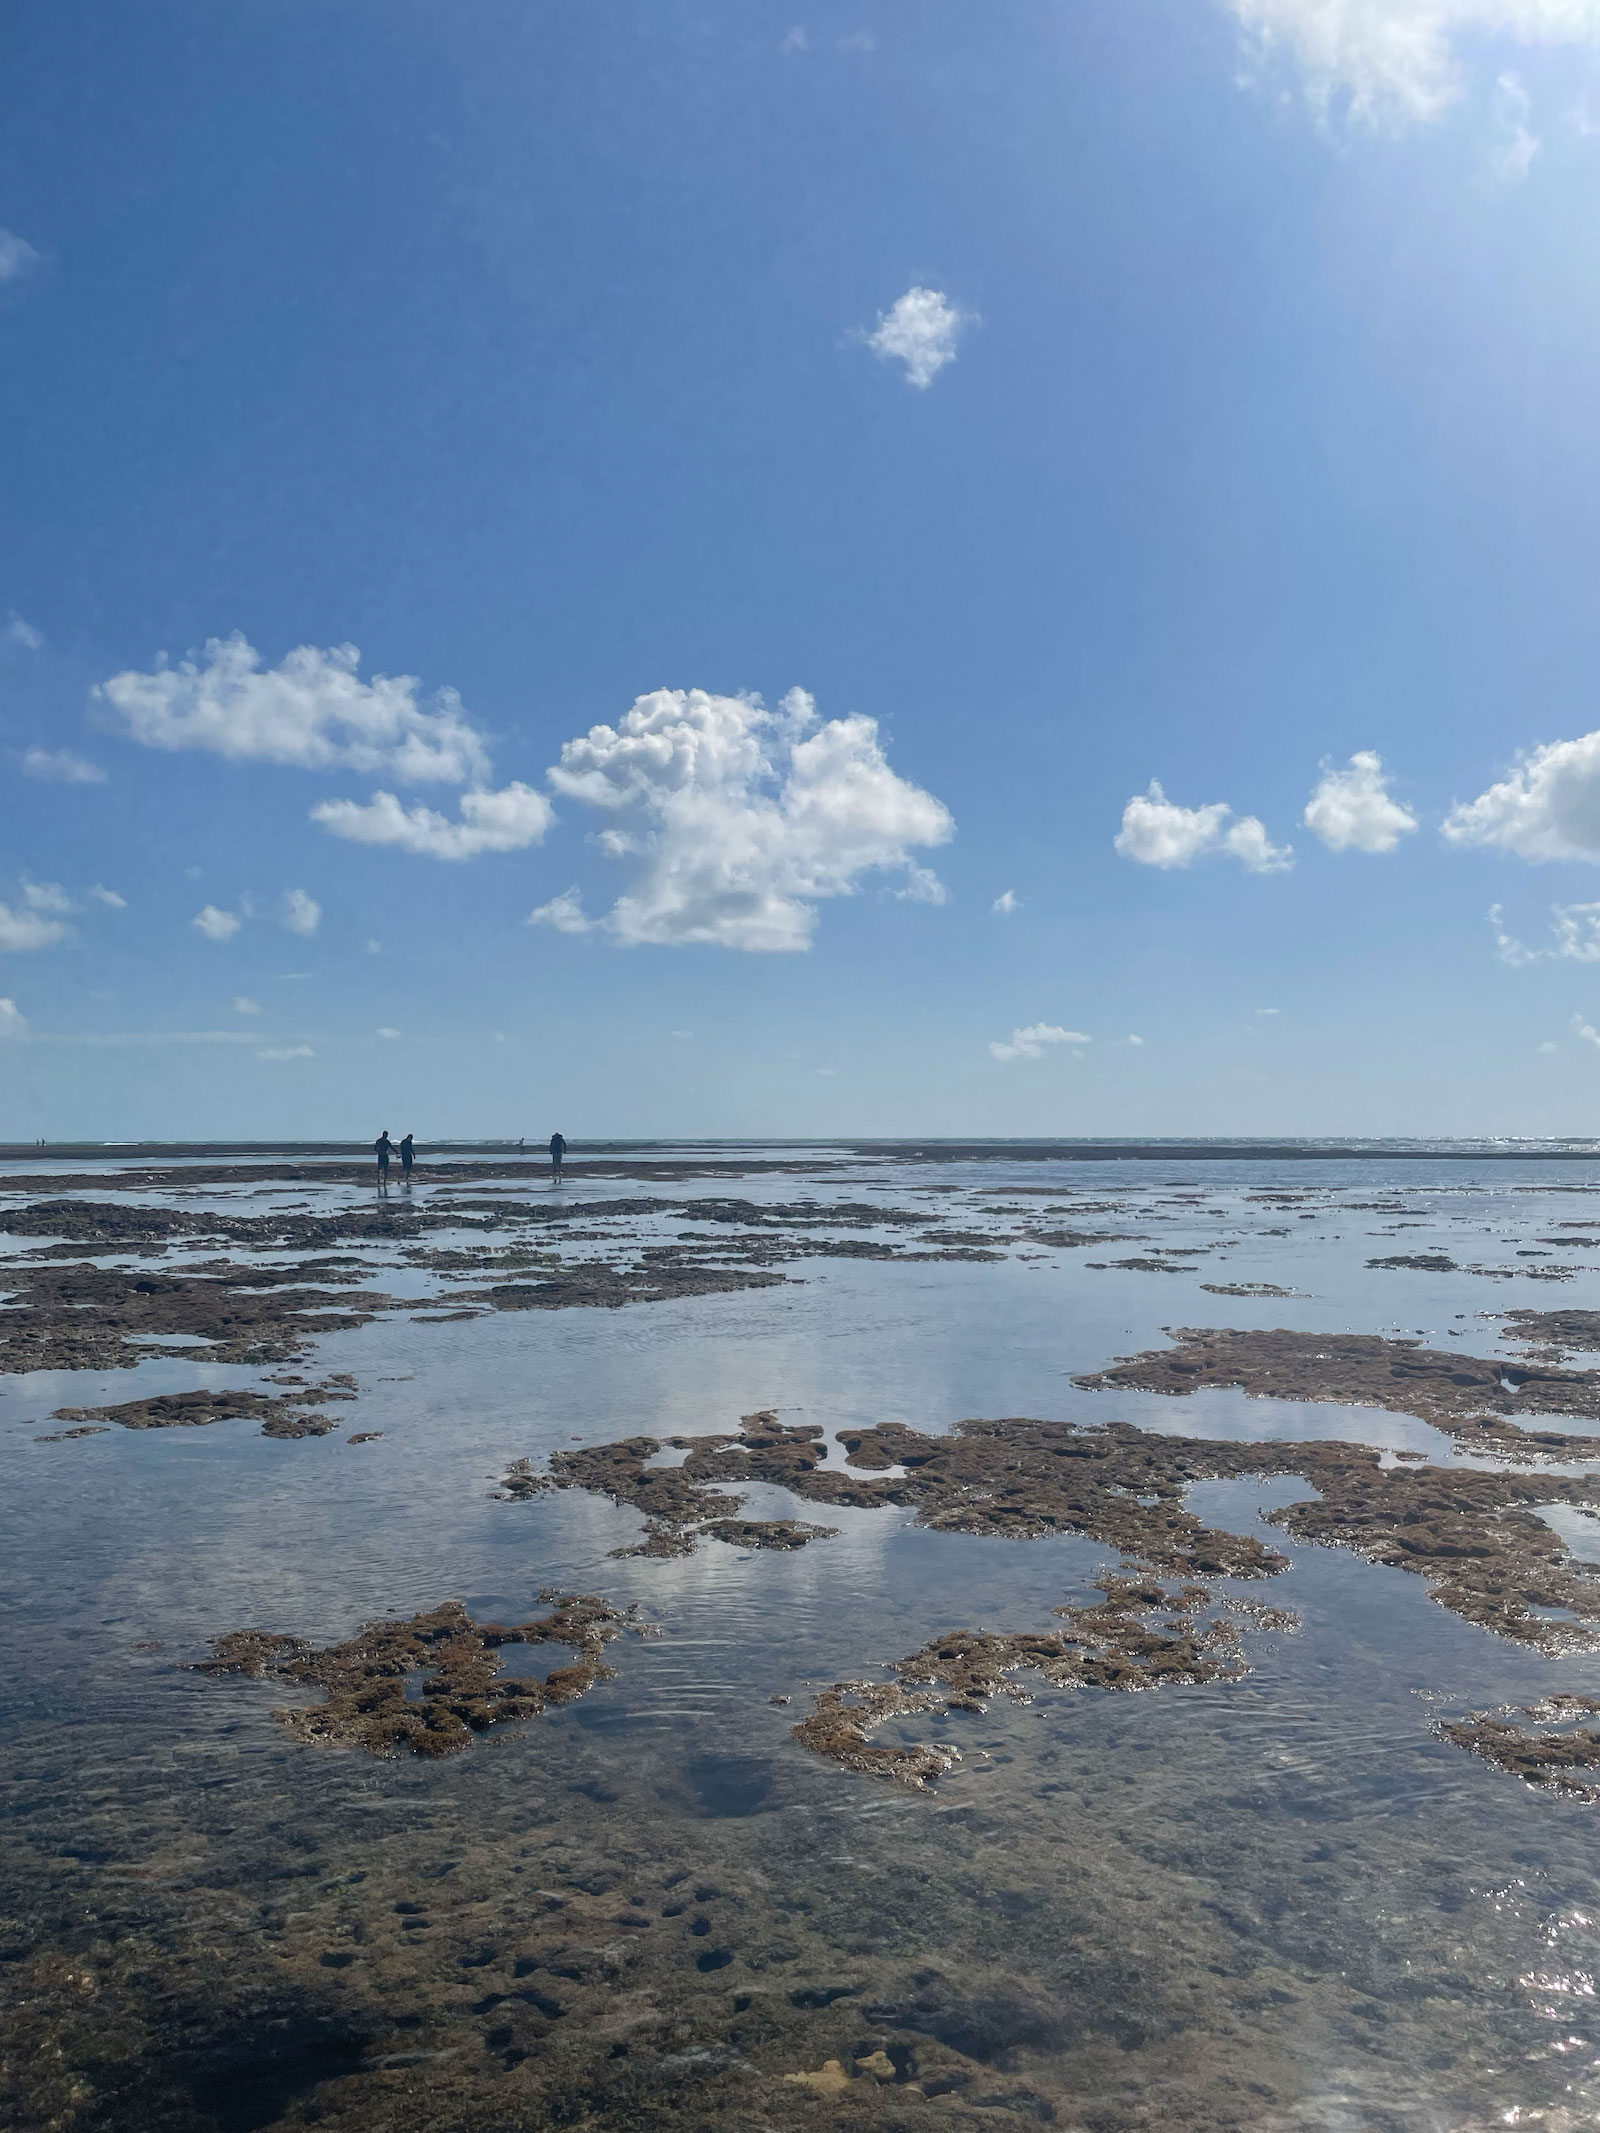 distant people figures walk along a watery stretch of shallow coral reef under a blue sky